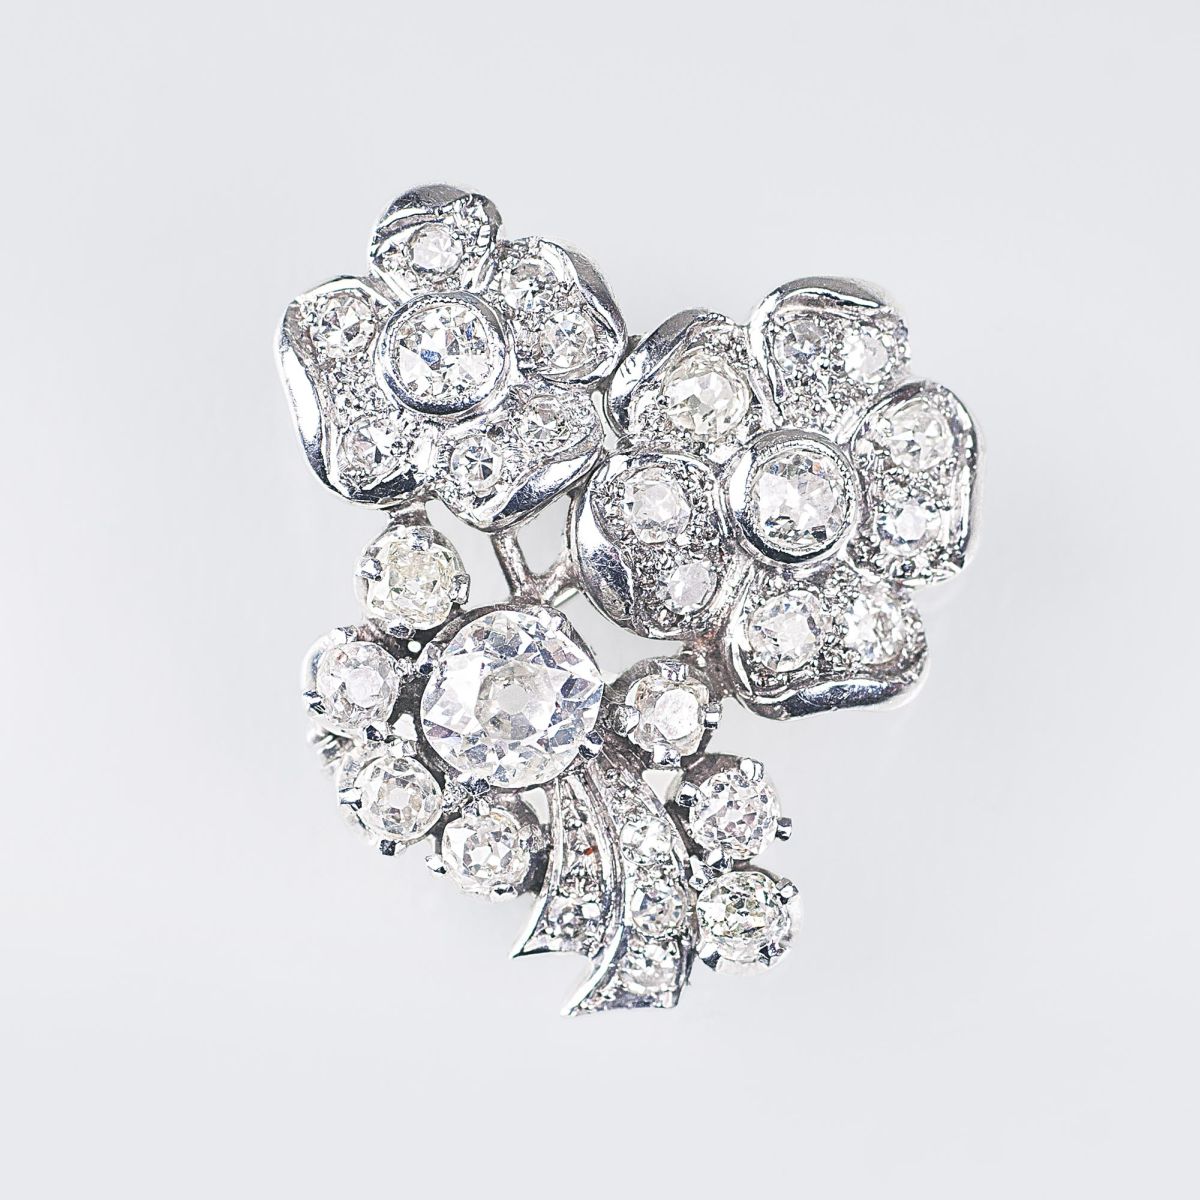 An Antique Flower Brooch with Old Cut Diamonds